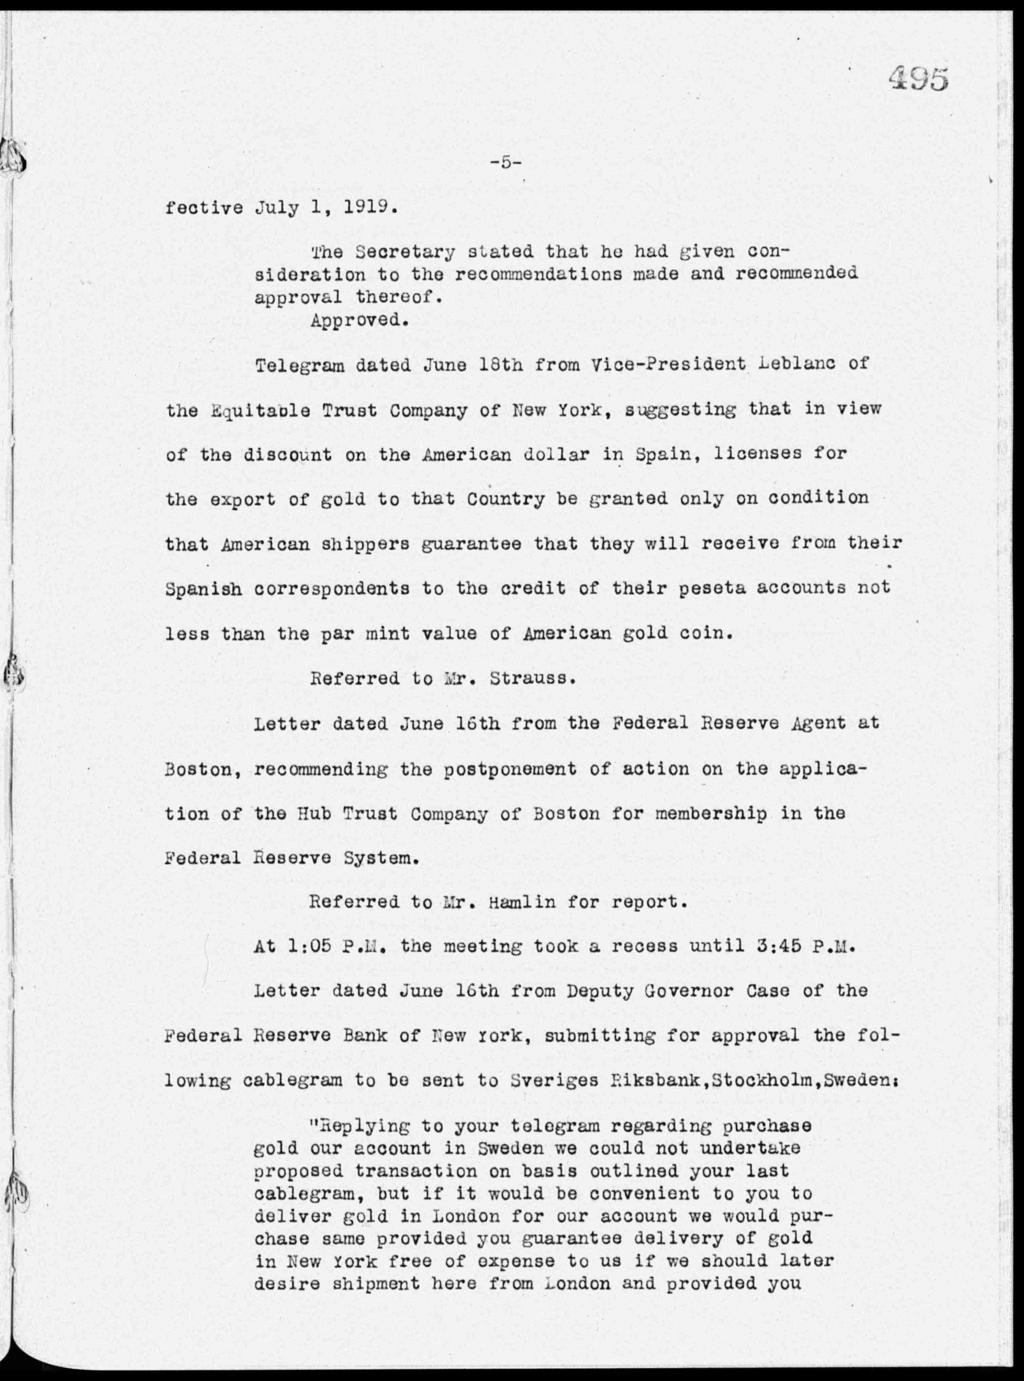 -5- fective July 1, 1919. The Secretary stated that he had given consideration to the recommendations made and recommended approval thereof.